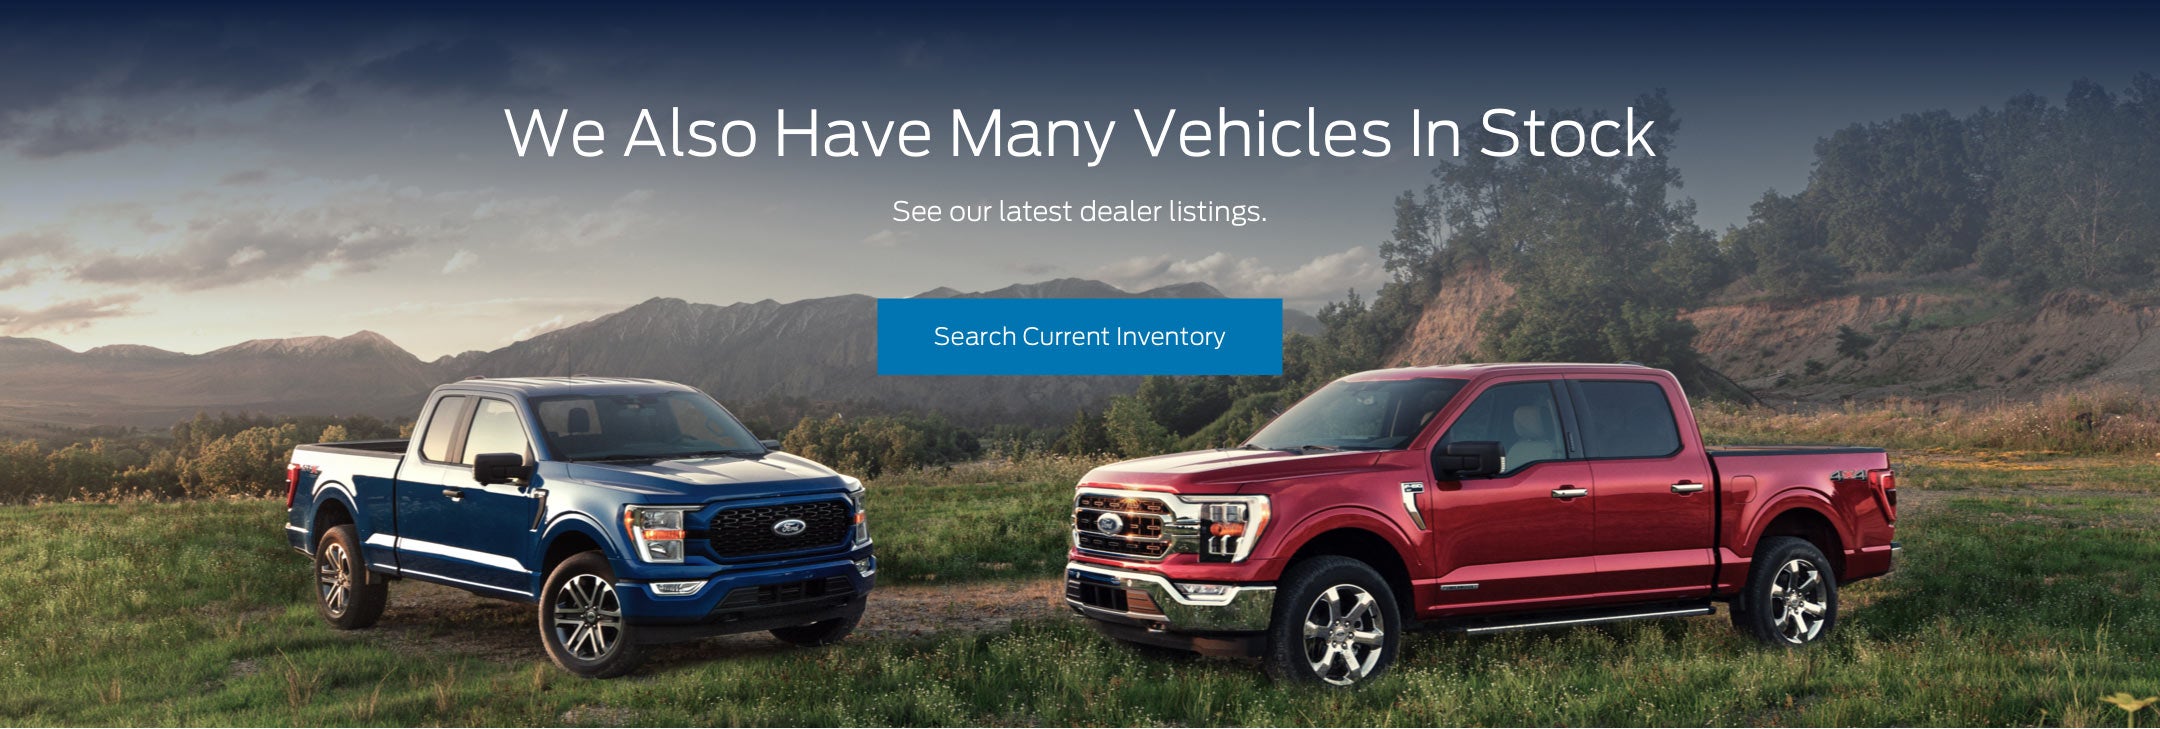 Ford vehicles in stock | Benton Ford in Benton KY